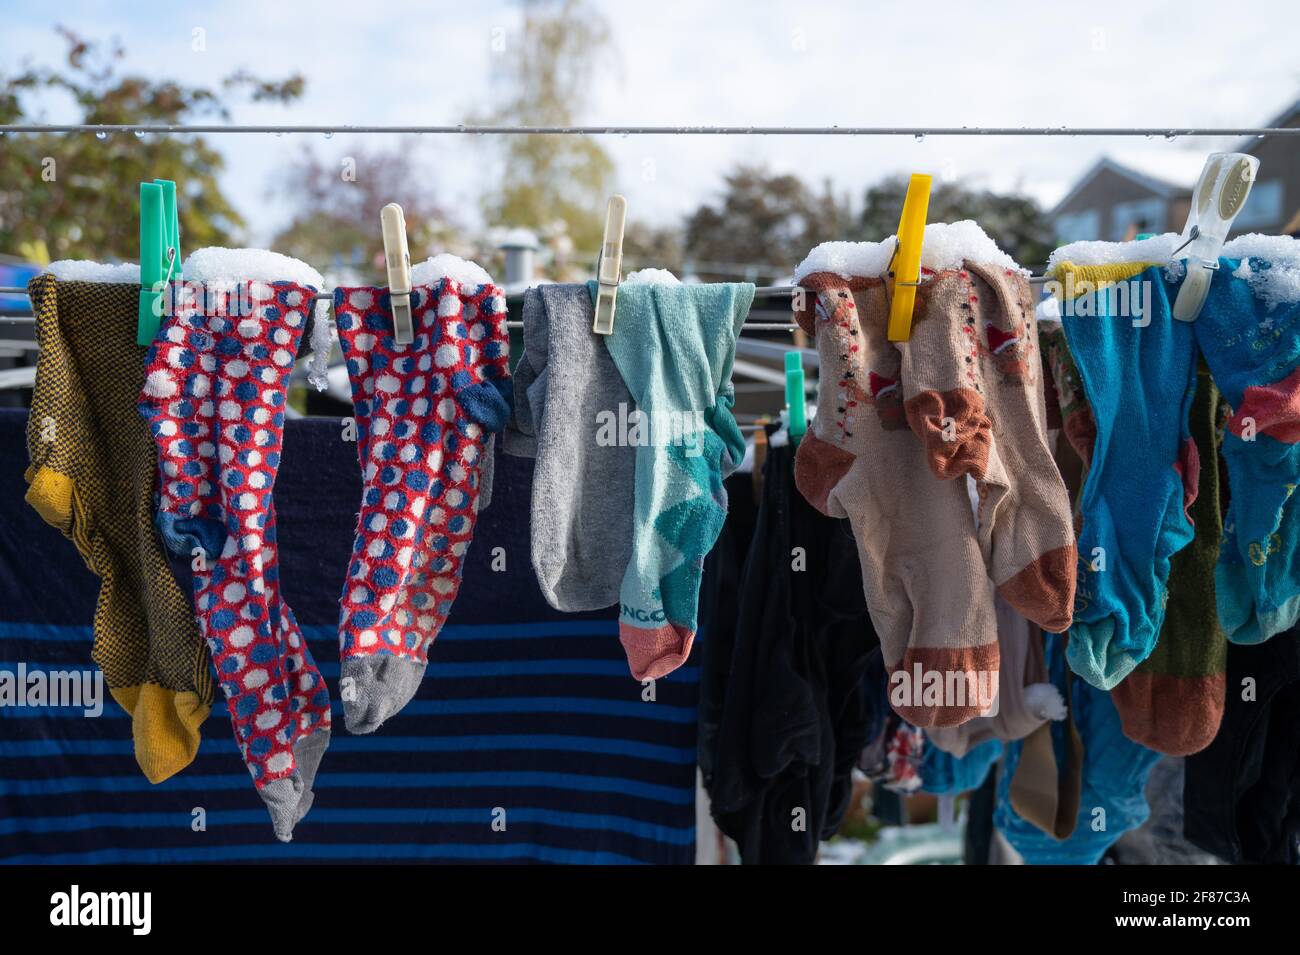 April 12th 2021. Oxford, UK. UK weather - Unseasonal snowfall covers laundry that has been hung outside to dry. Credit: Andrew Walmsley/Alamy Live News Stock Photo